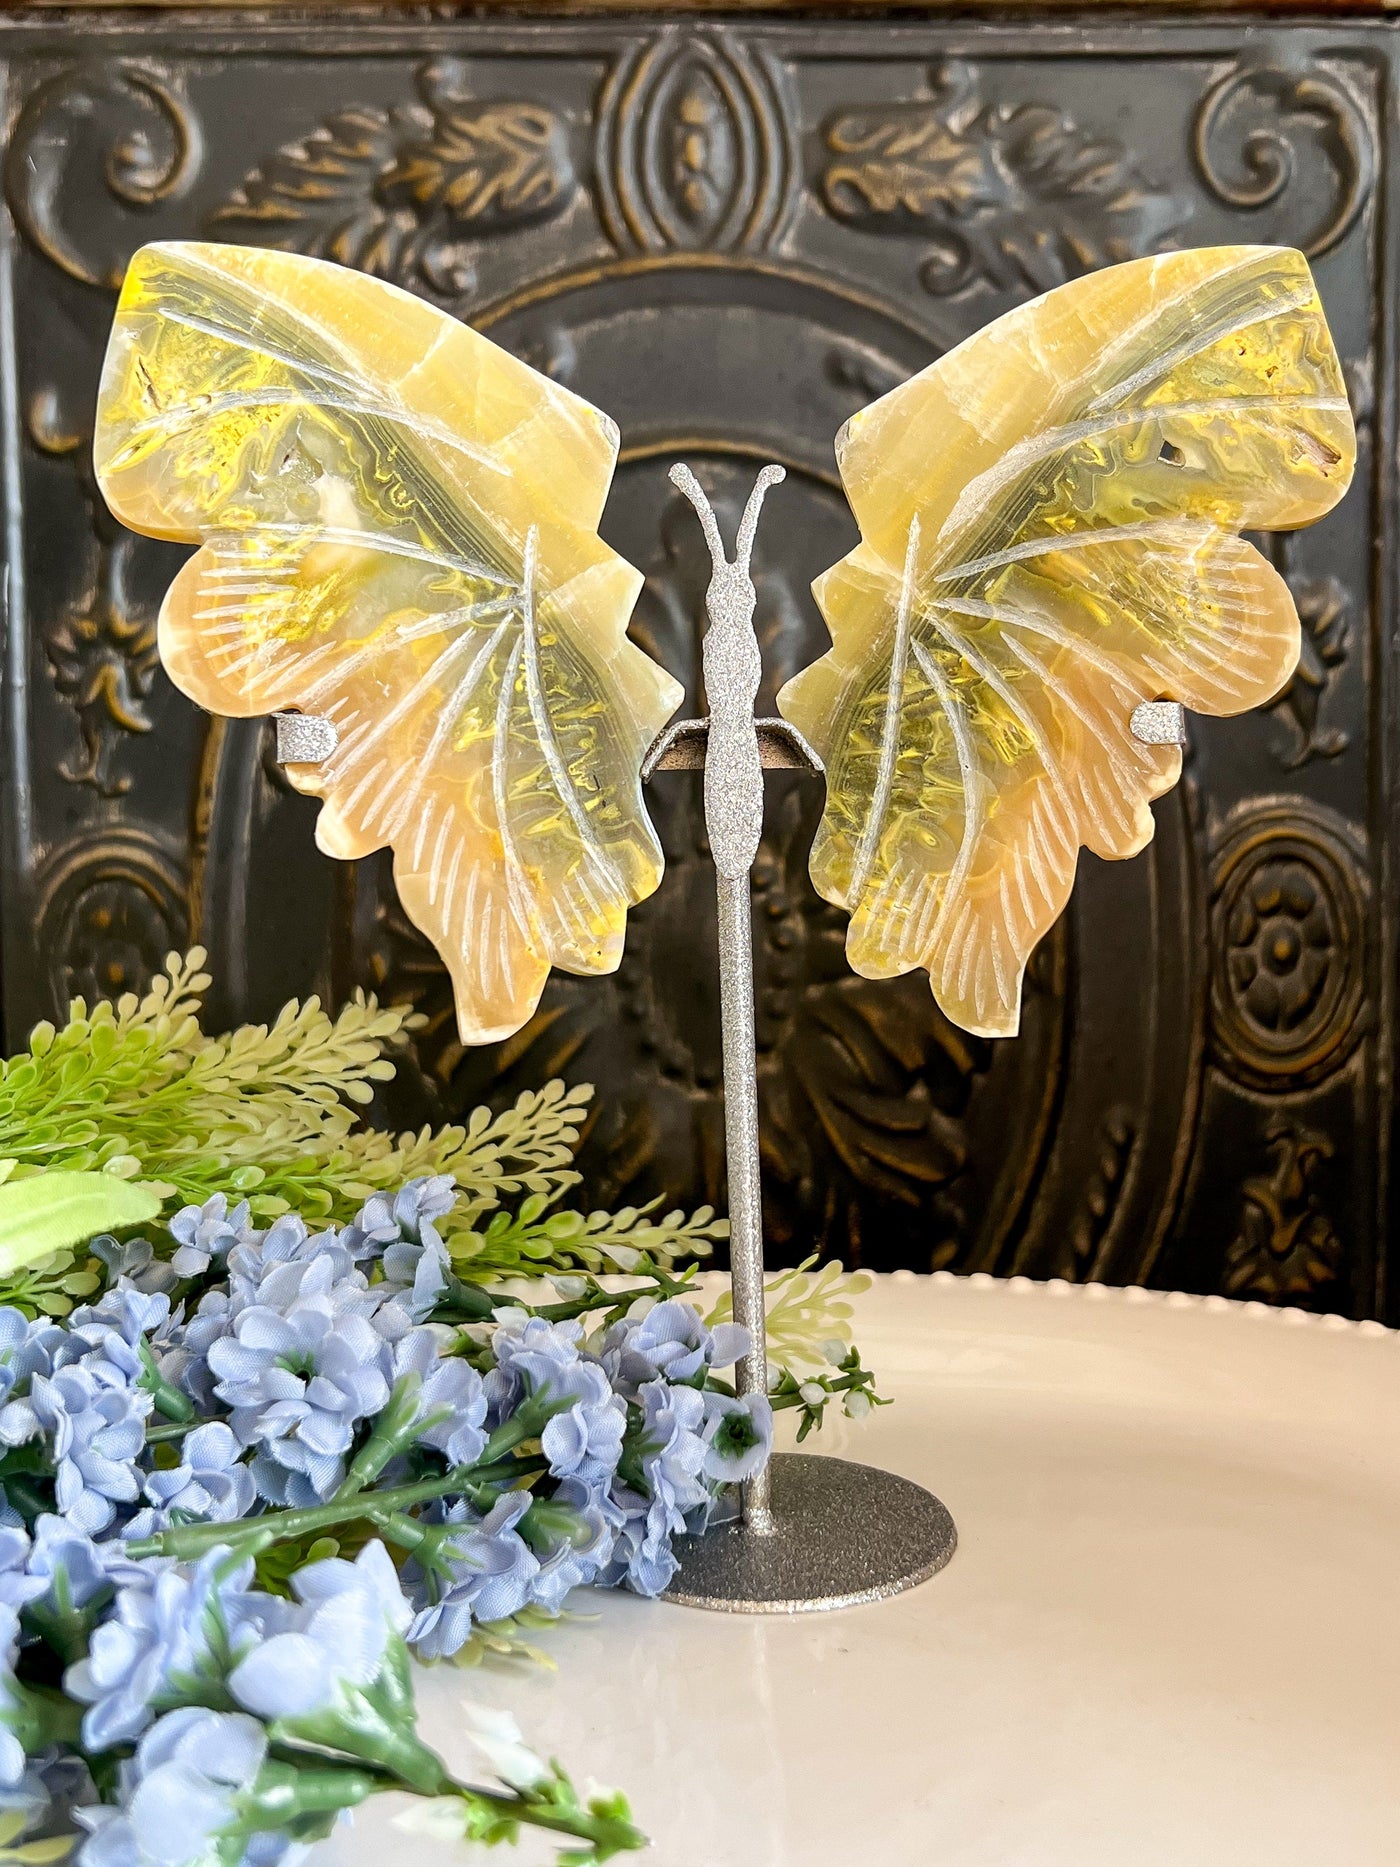 BUMBLEBEE JASPER BUTTERFLY WINGS Revive In Style Vintage Furniture Painted Refinished Redesign Beautiful One of a Kind Artistic Antique Unique Home Decor Interior Design French Country Shabby Chic Cottage Farmhouse Grandmillenial Coastal Chalk Paint Metallic Glam Eclectic Quality Dovetailed Rustic Furniture Painter Pinterest Bedroom Living Room Entryway Kitchen Home Trends House Styles Decorating ideas